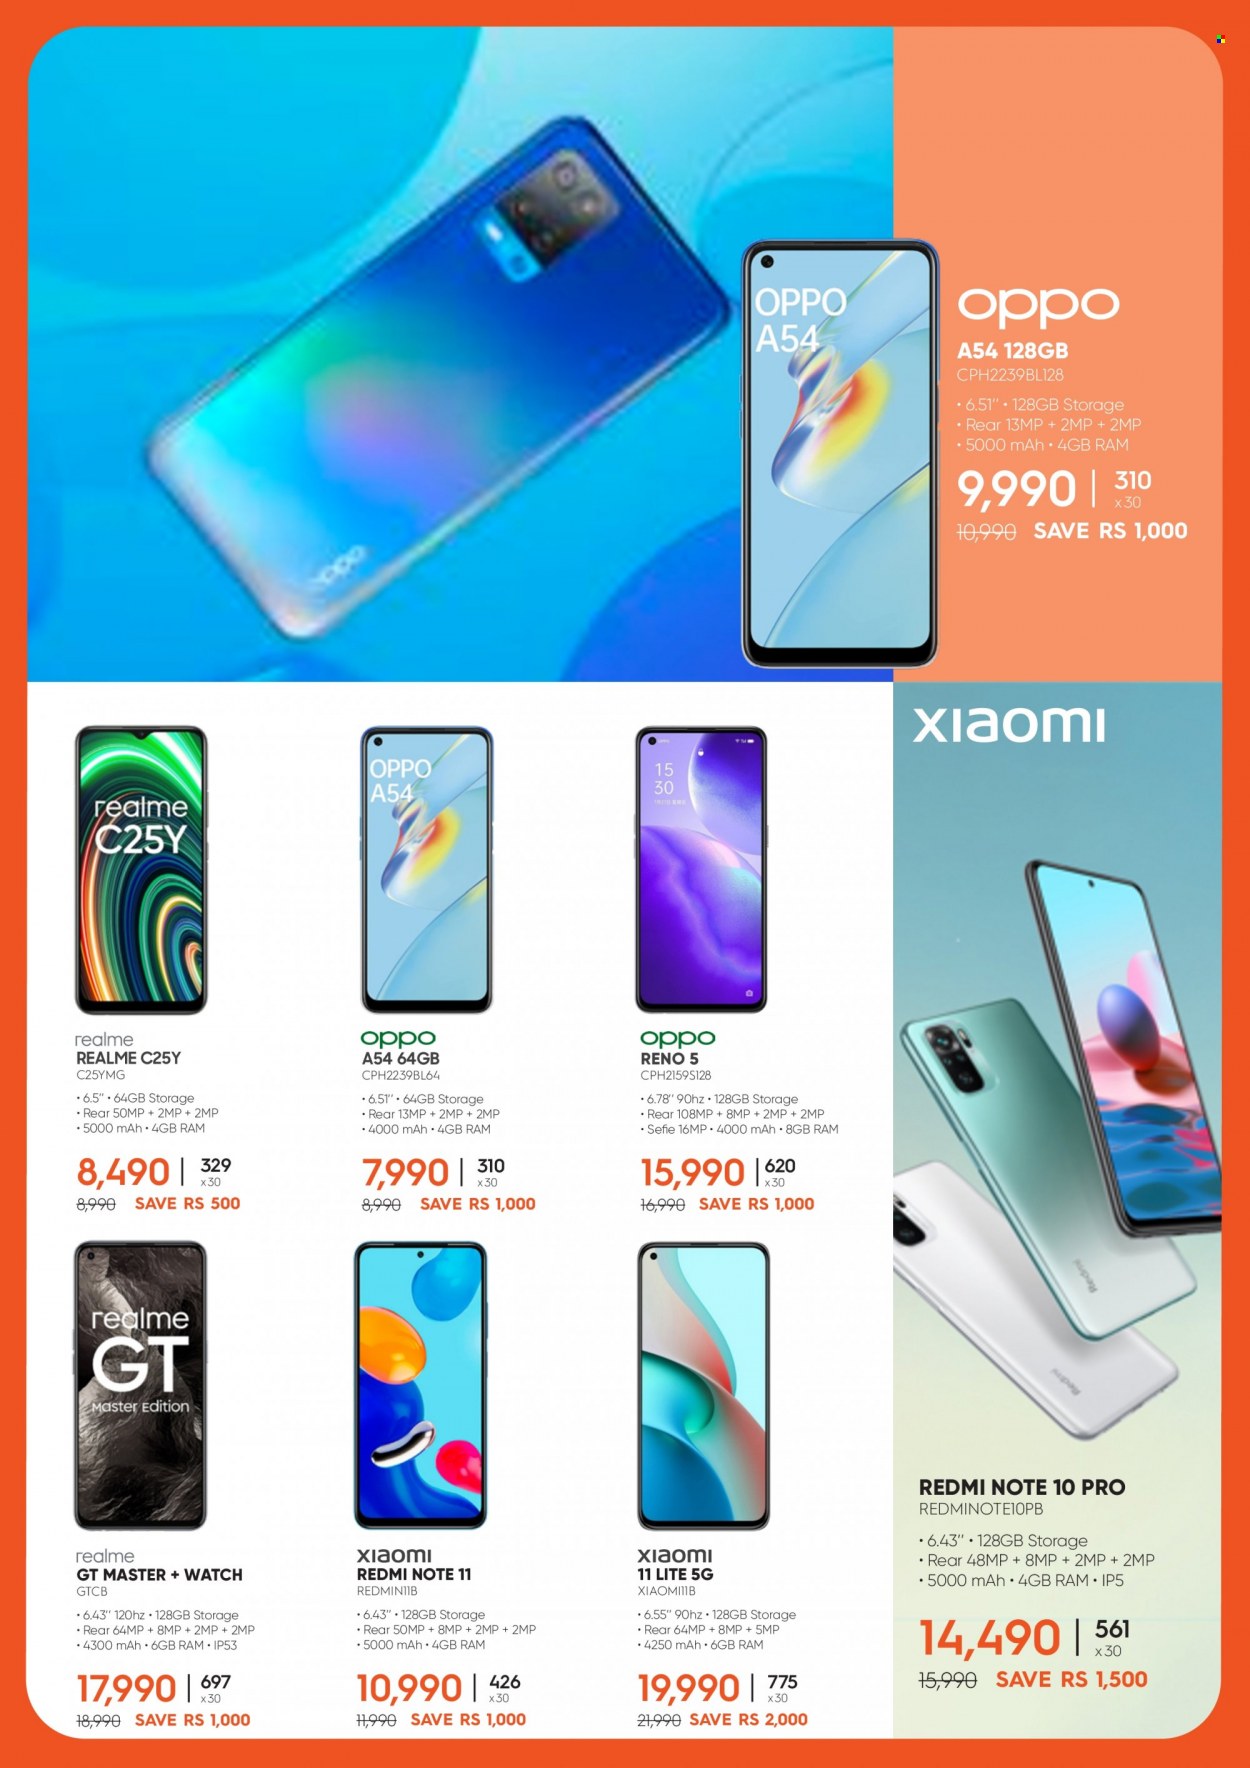 thumbnail - 361 Catalogue - 26.08.2022 - 12.09.2022 - Sales products - Xiaomi, Oppo, Realme, Redmi Note 10 Pro. Page 9.